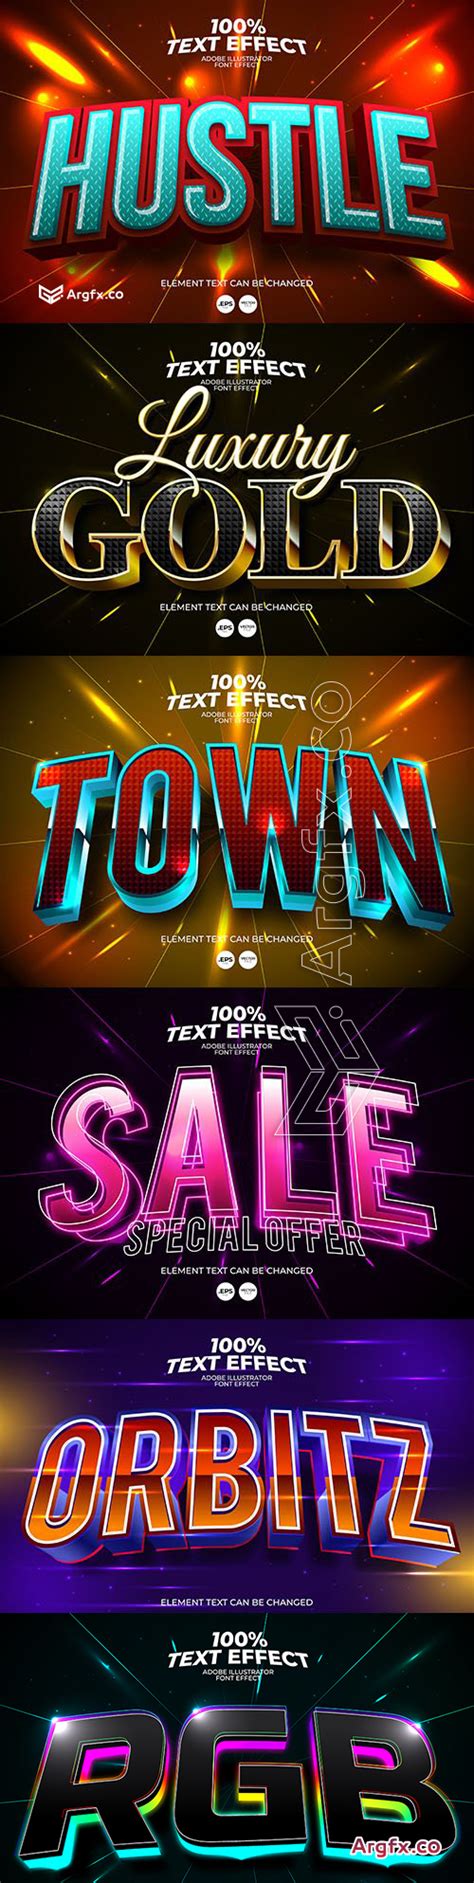 Editable Font Effect Text Collection Illustration Design 192 Free